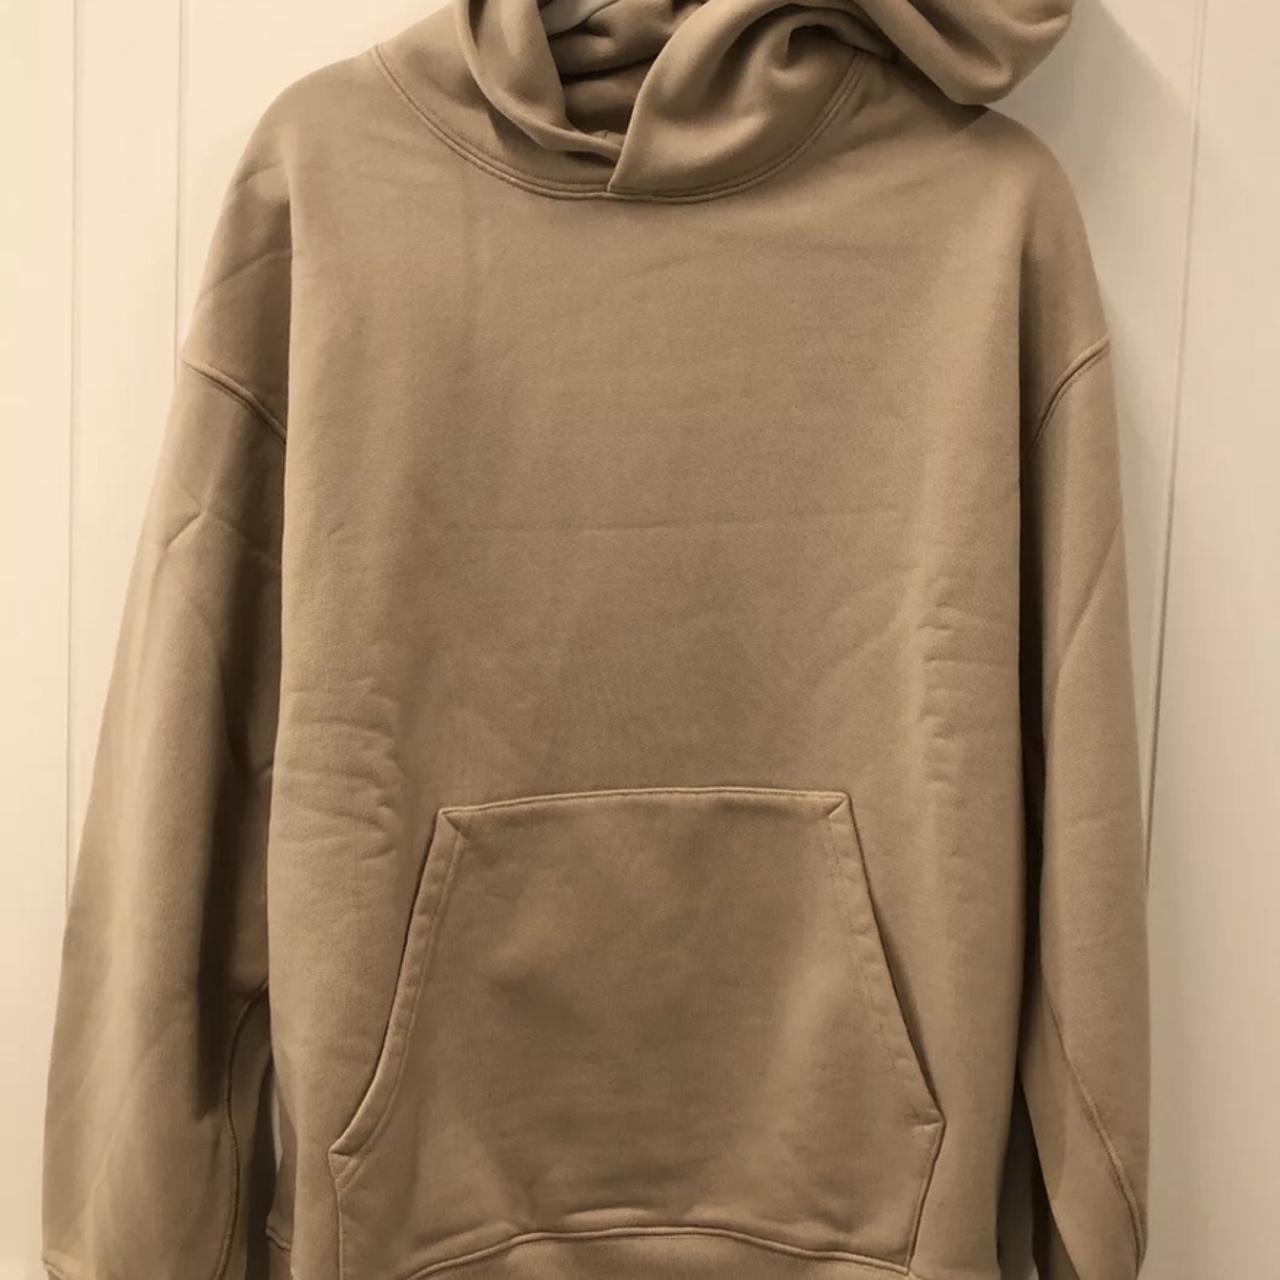 Yeezy Season 4 Boxy Fit Cotton Hoodie, New with